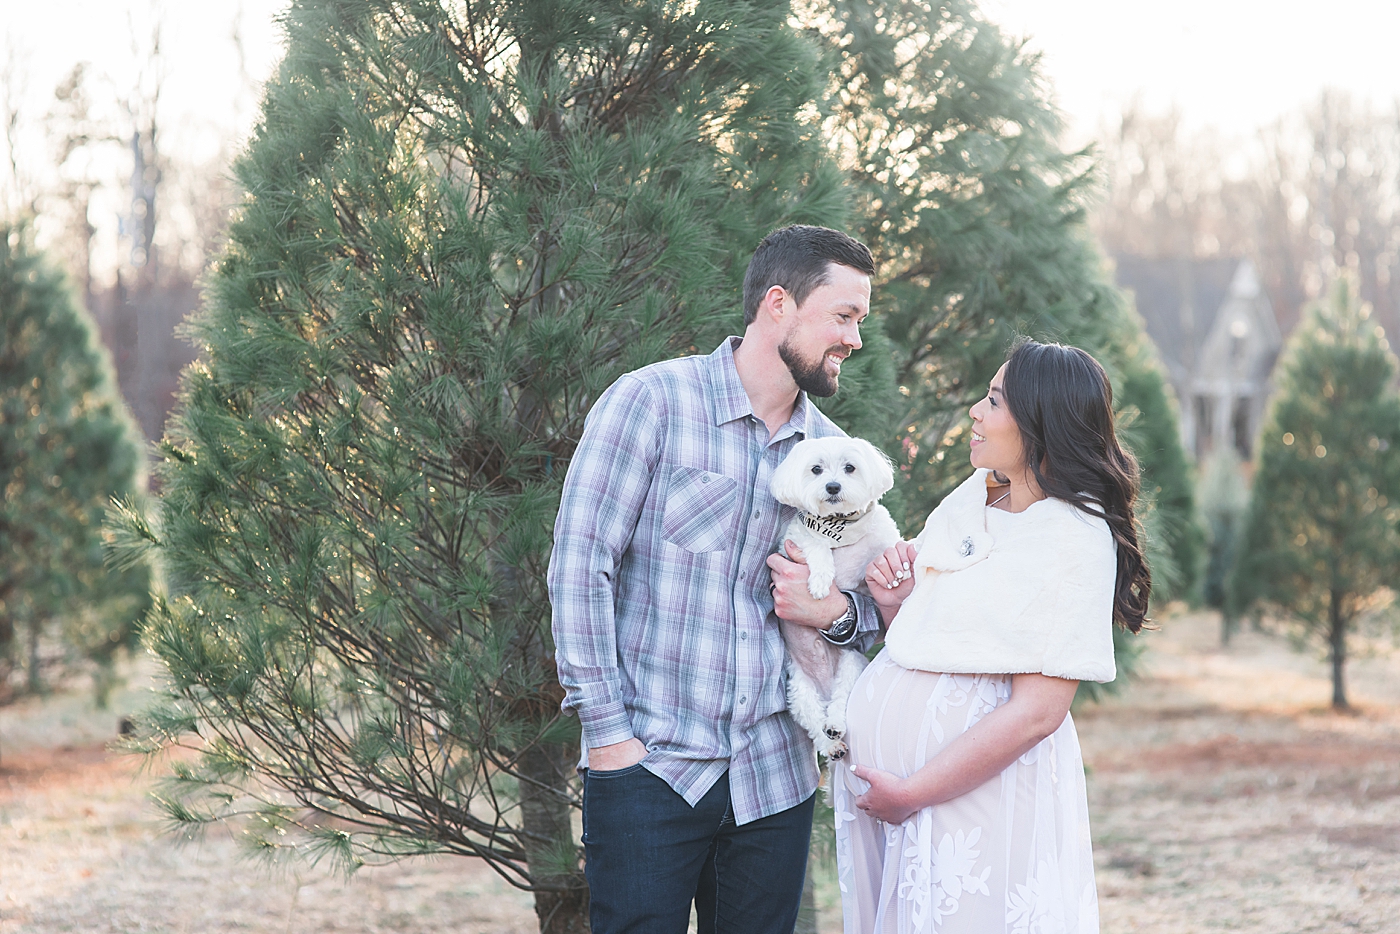 Mom and dad to be holding their dog at the tree farm | Photo by Anna Wisjo Photography